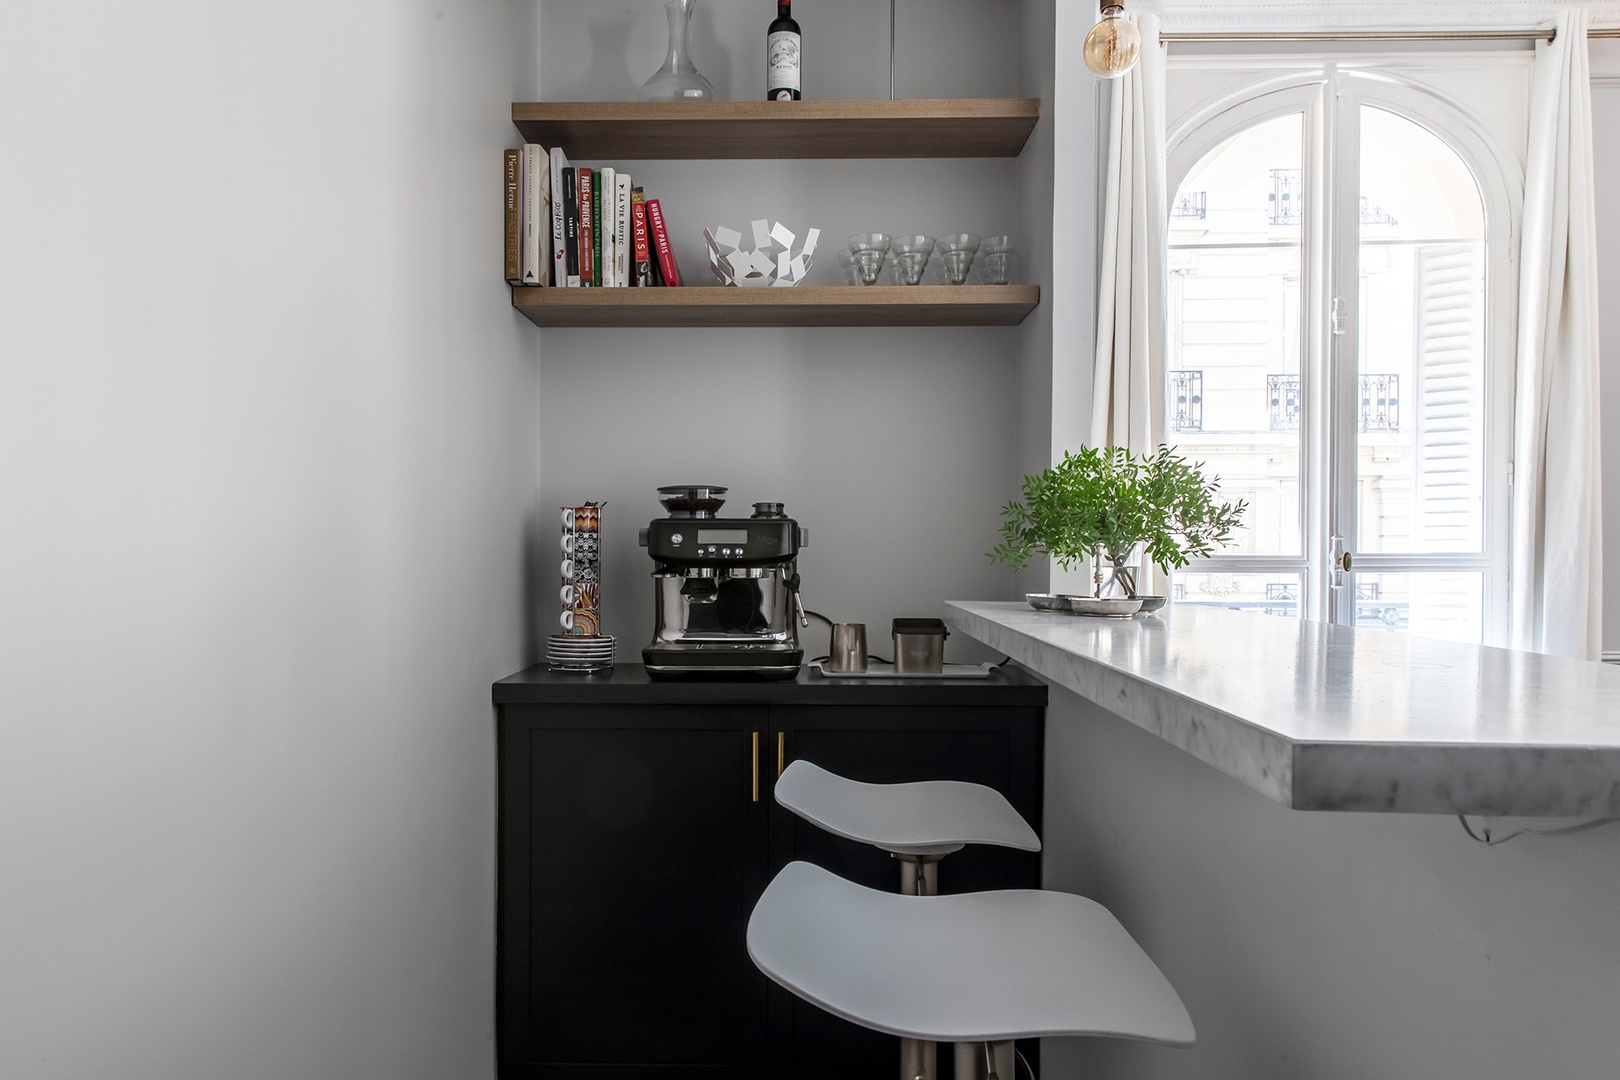 The bar in the kitchen is also a great breakfast nook.